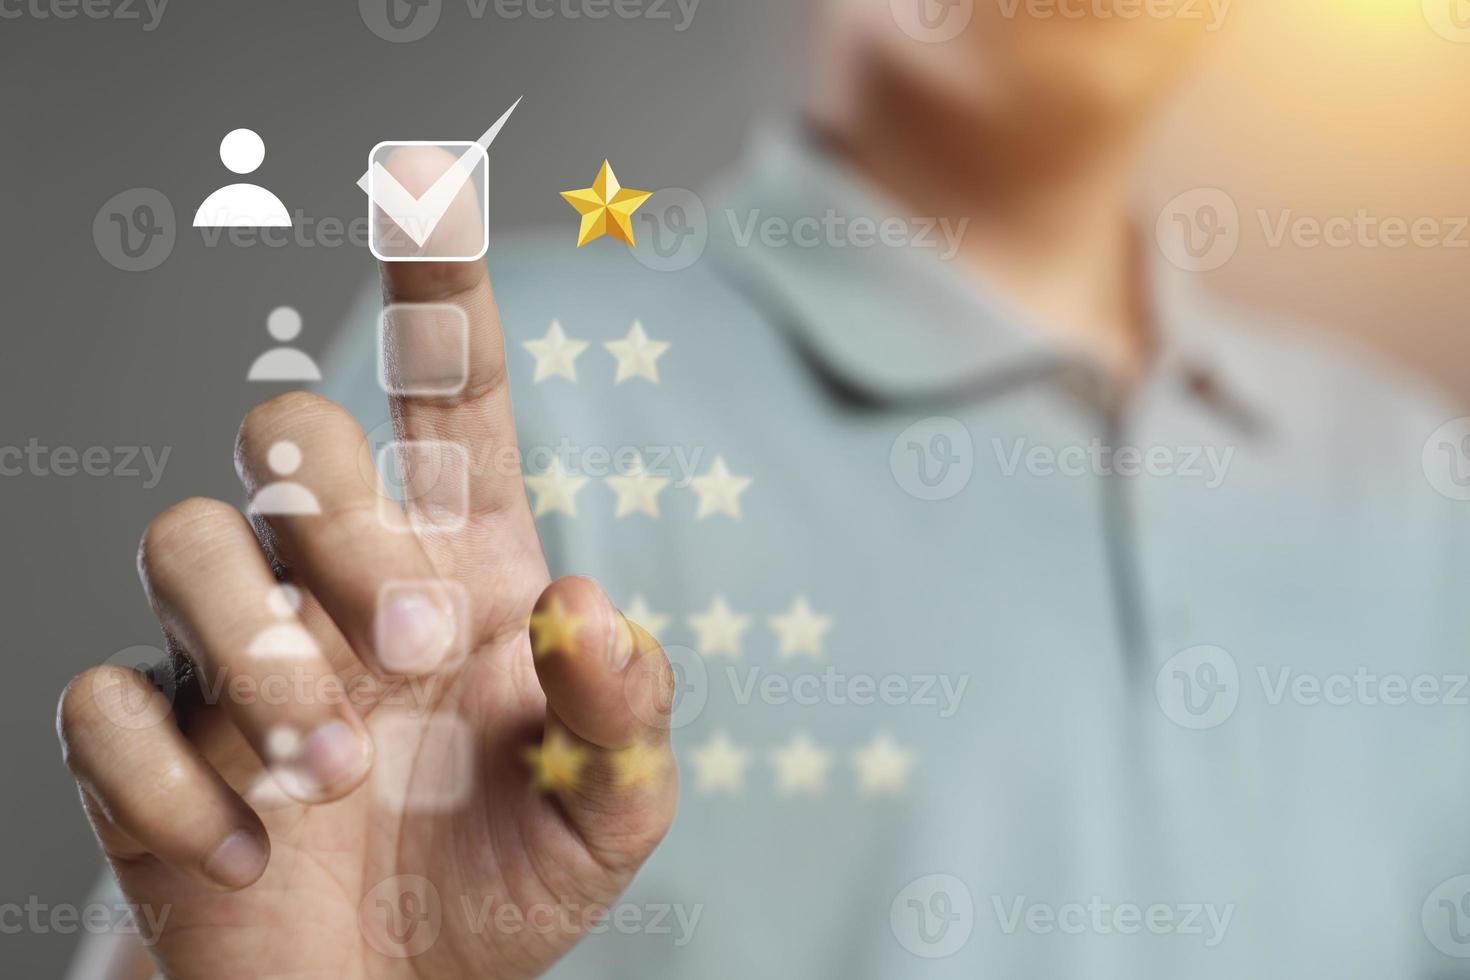 one star rating review of customer satisfaction for bad service and experience photo